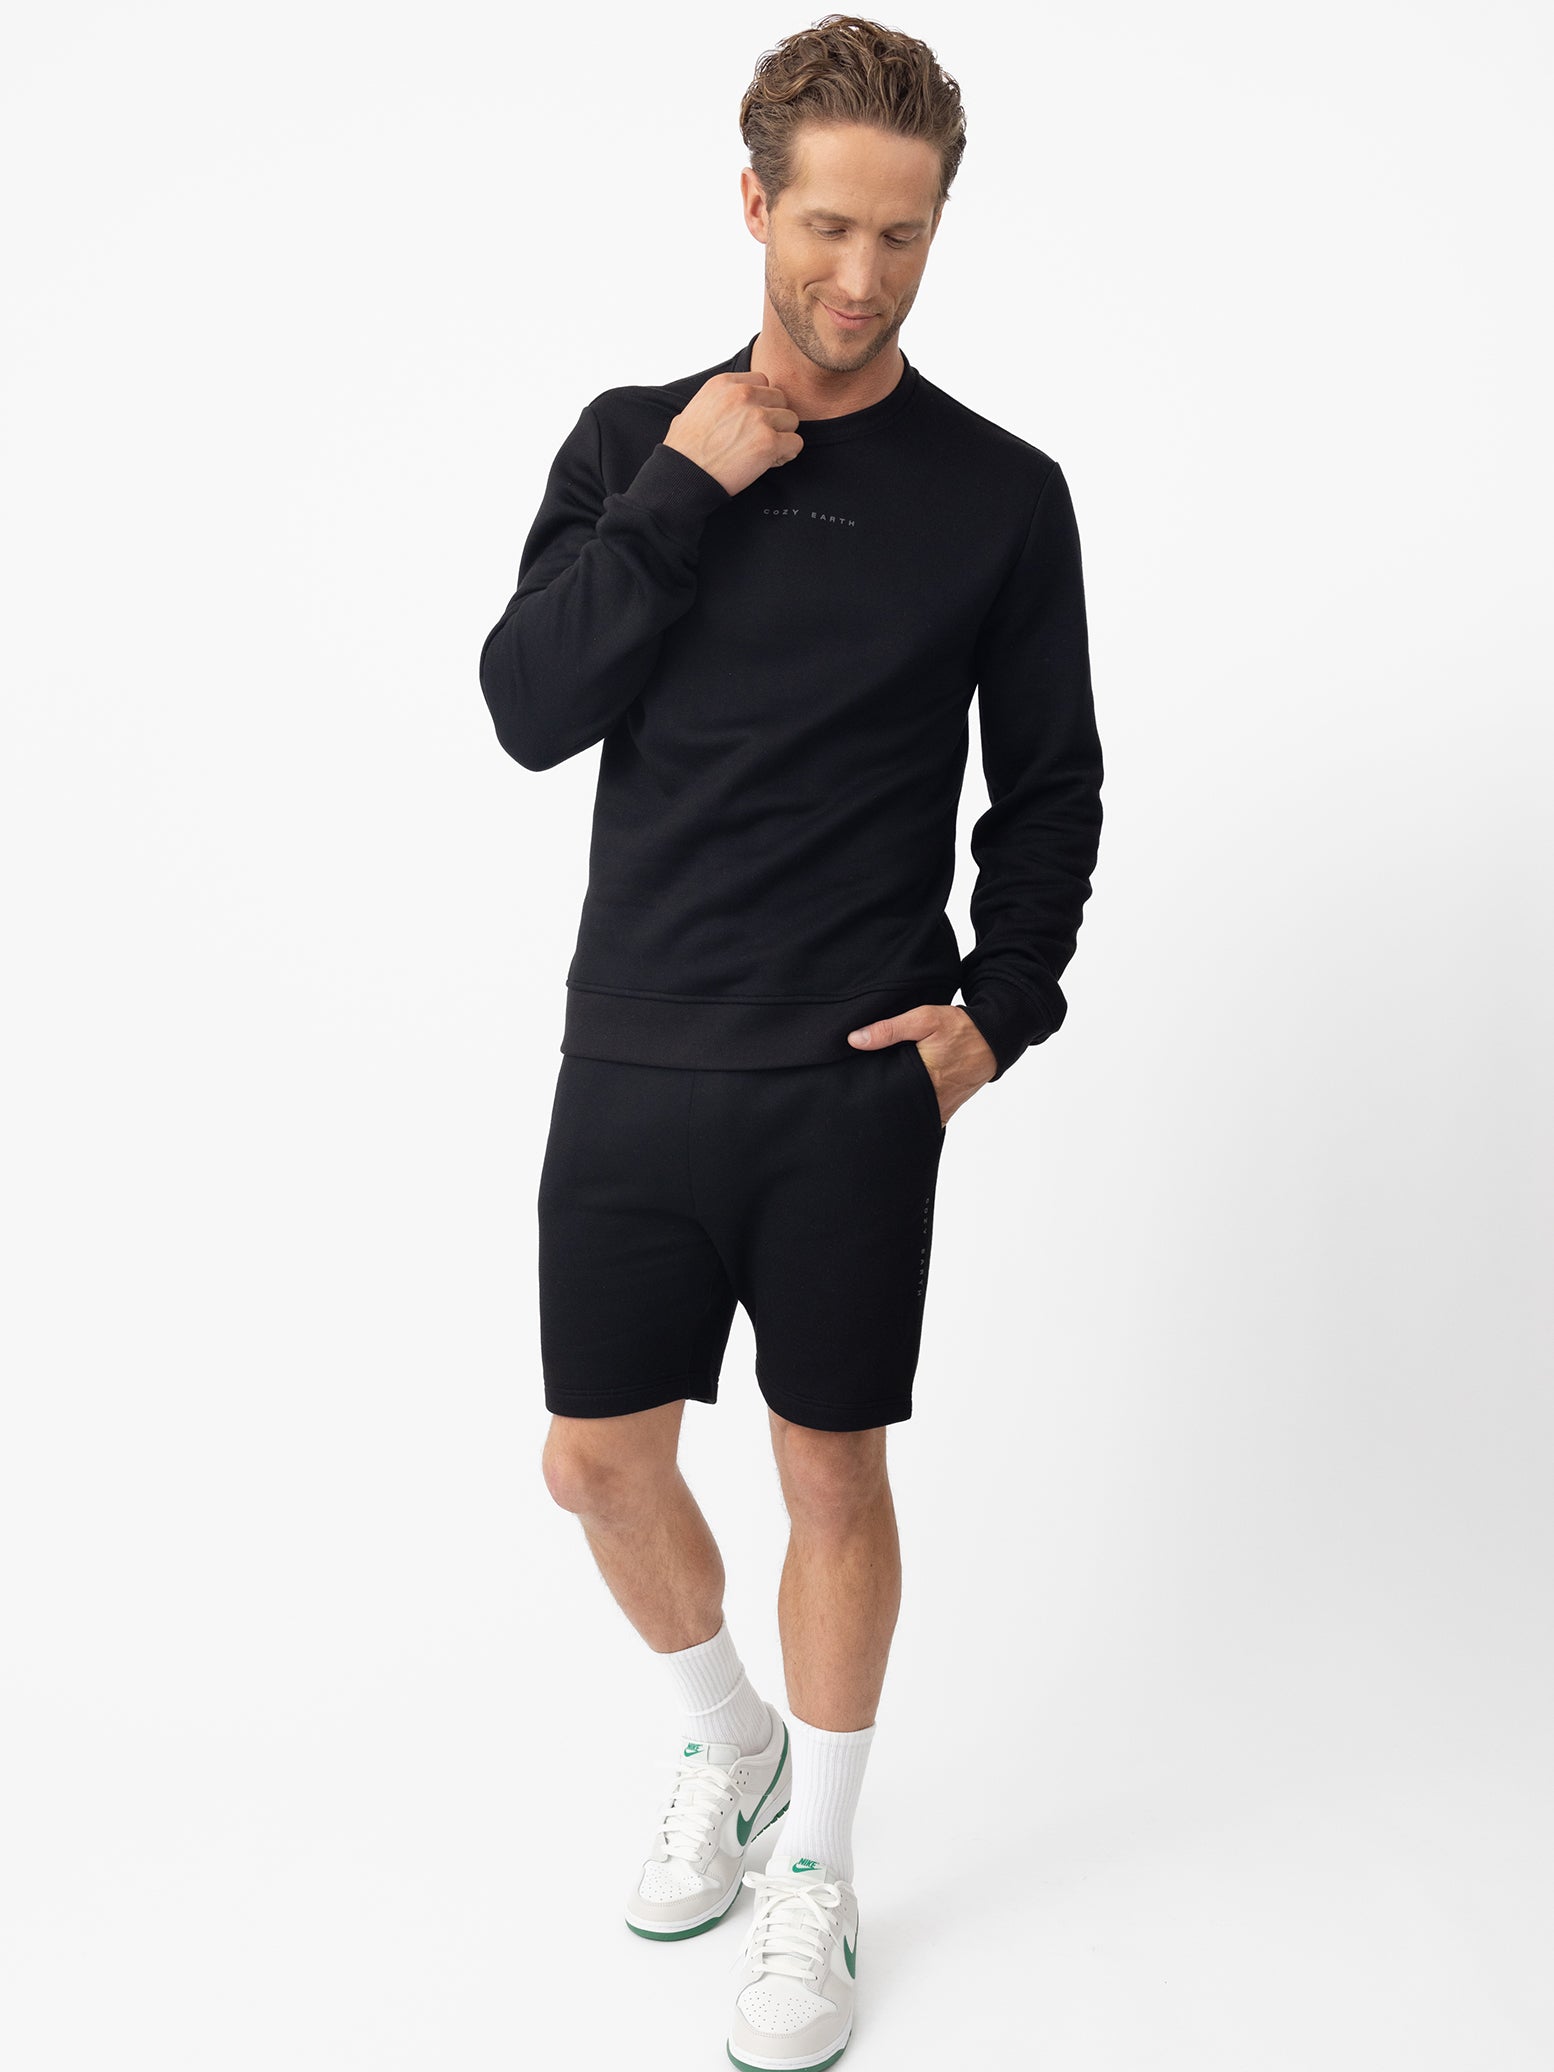 Man wearing black cityscape pullover and shorts with white background |Color:Black